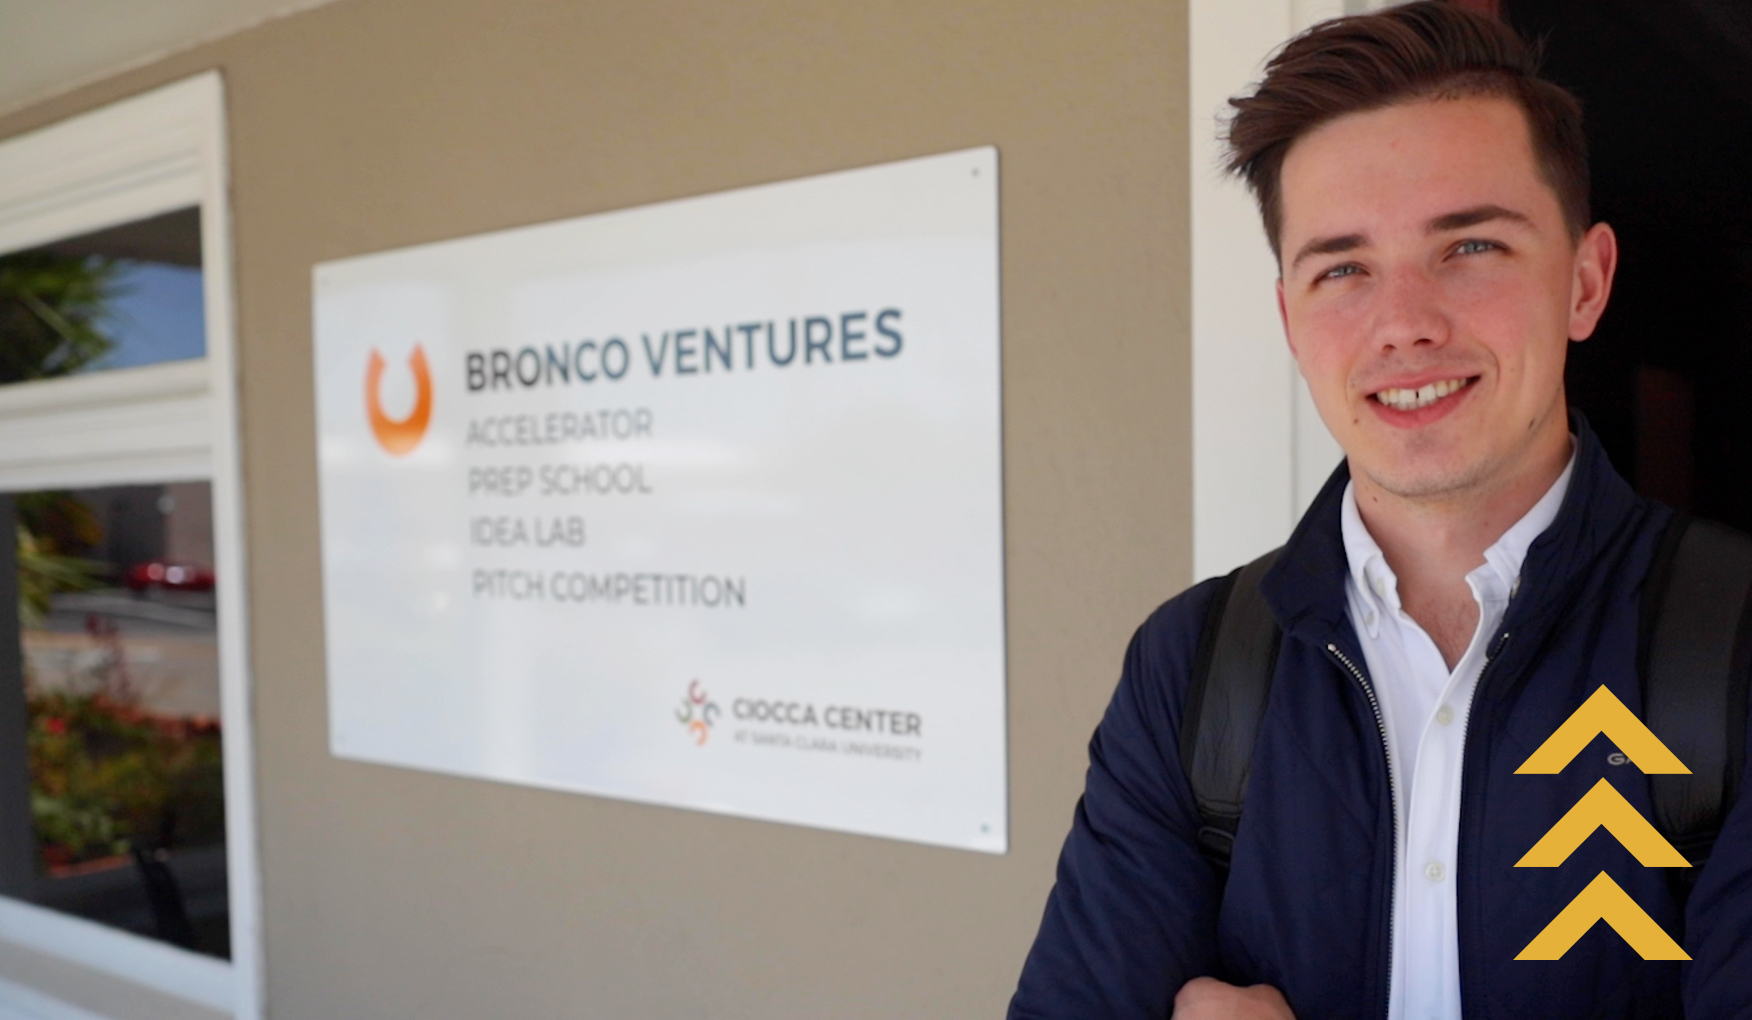 A Santa Clara student stands in front of the 'Bronco Ventures' sign. He is dressed in business casual attire with a backpack, with his arms crossed. The sign indicates an accelerator, prep school, idea lab, and pitch competition at the Ducca Center.